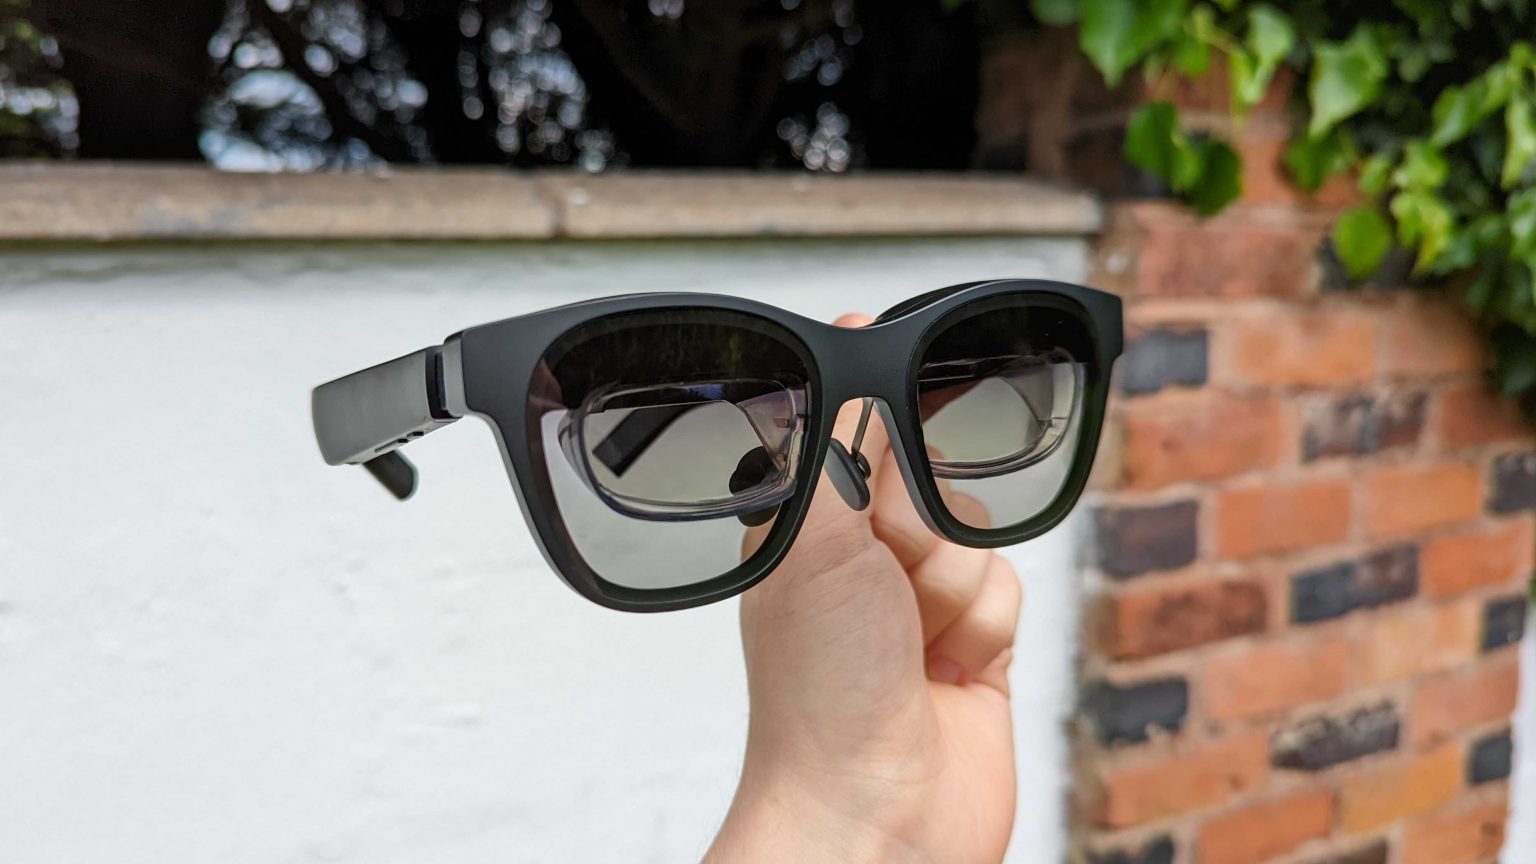 Nreal says its Light mixed reality glasses will launch in the US for $599 on November 30 in 20 Verizon stores and online December 2 (Igor Bonifacic/Engadget)